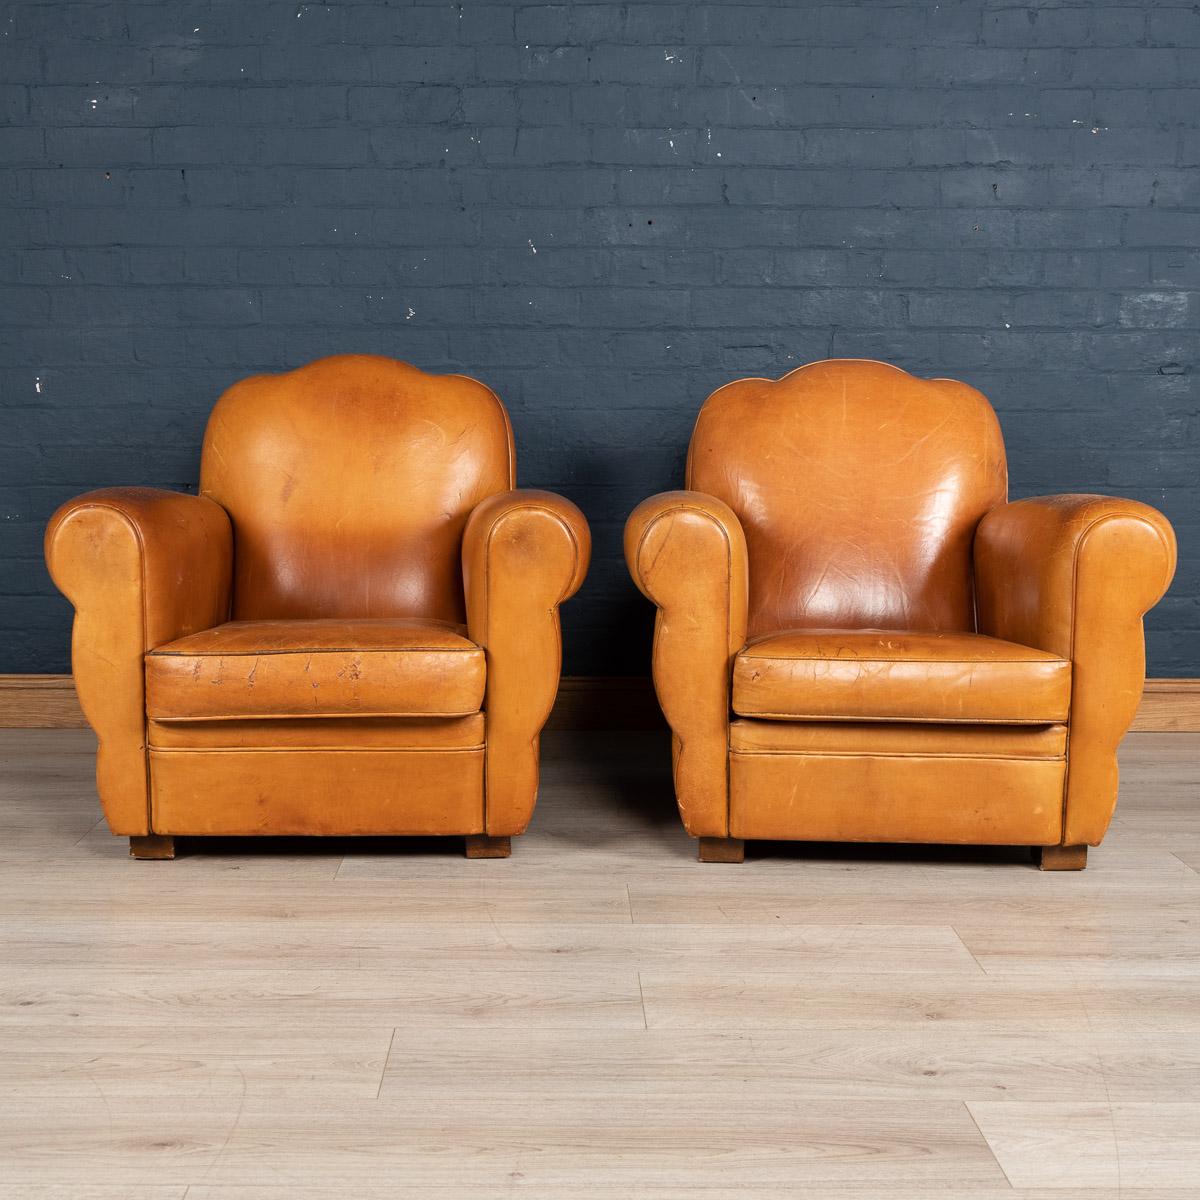 A lovely late 20th century pair of Art Deco style French leather club chairs. Wonderful patina and in fine vintage condition, structurally sound, these chairs perennially ooze class and sophistication. Extremely comfortable, they suit any style of